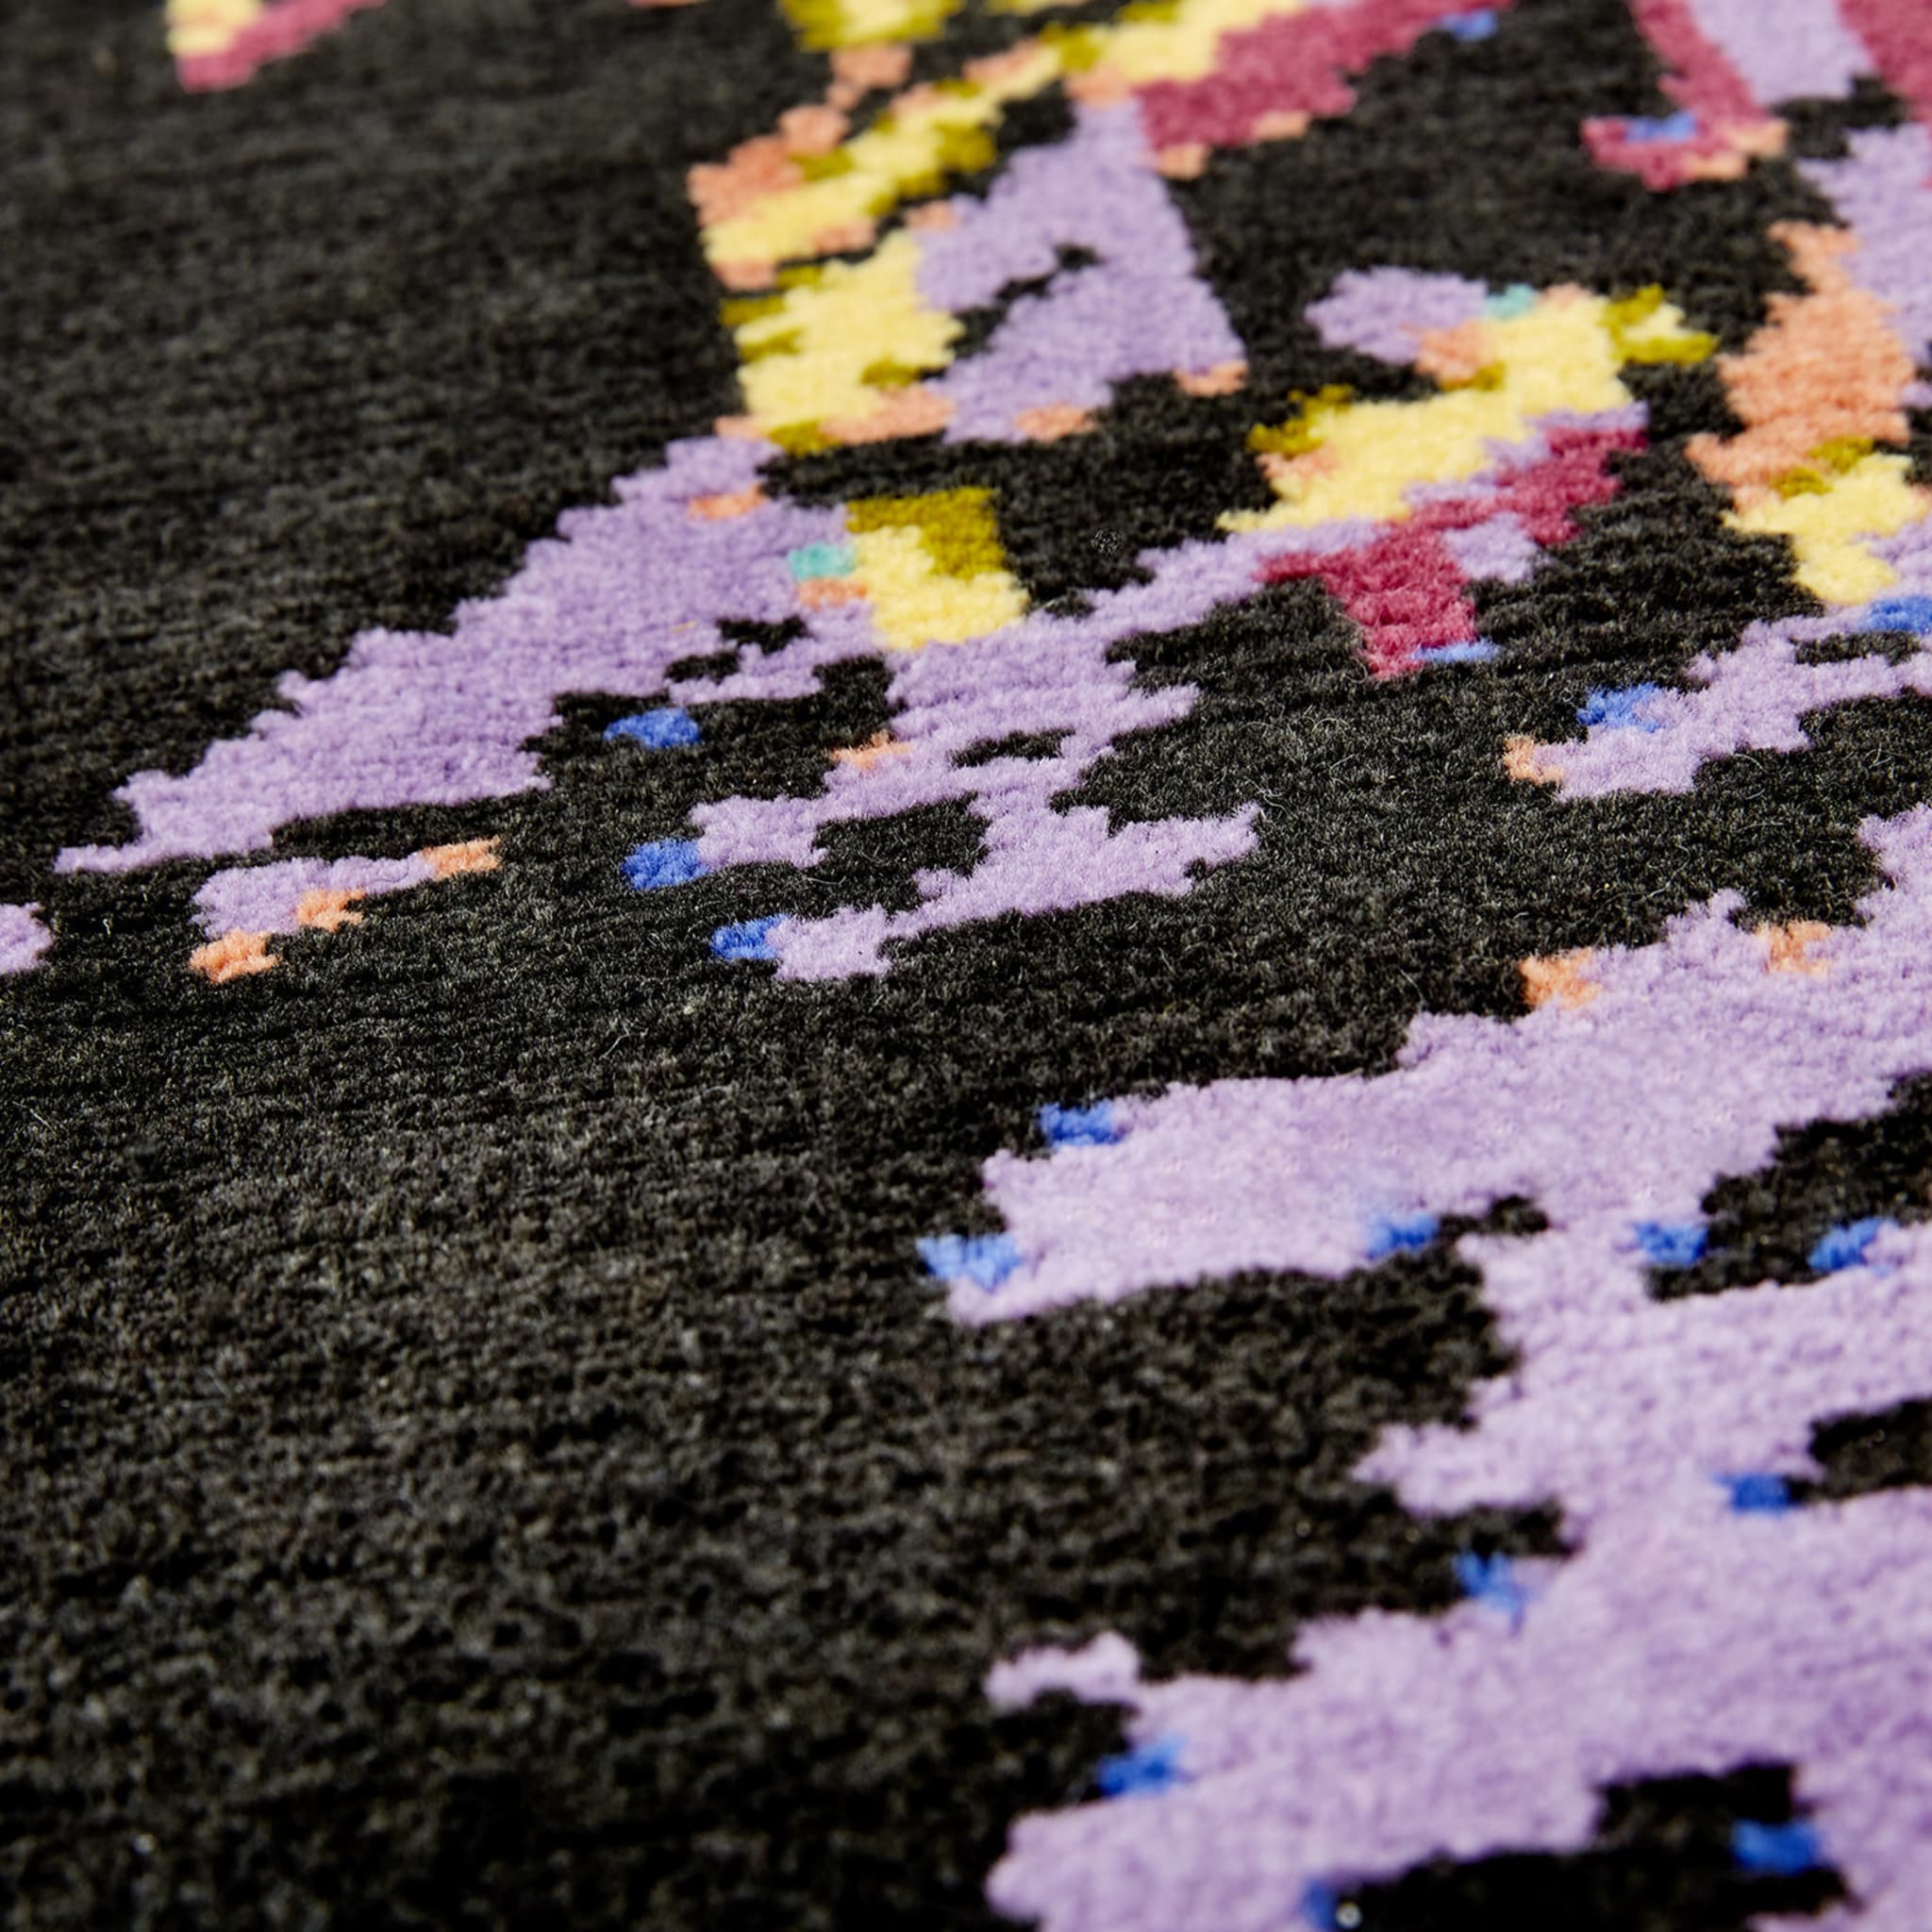 Disappearing Spectrum Wool Rug by Clémentine Chambon - Limited Edition - Alternative view 3